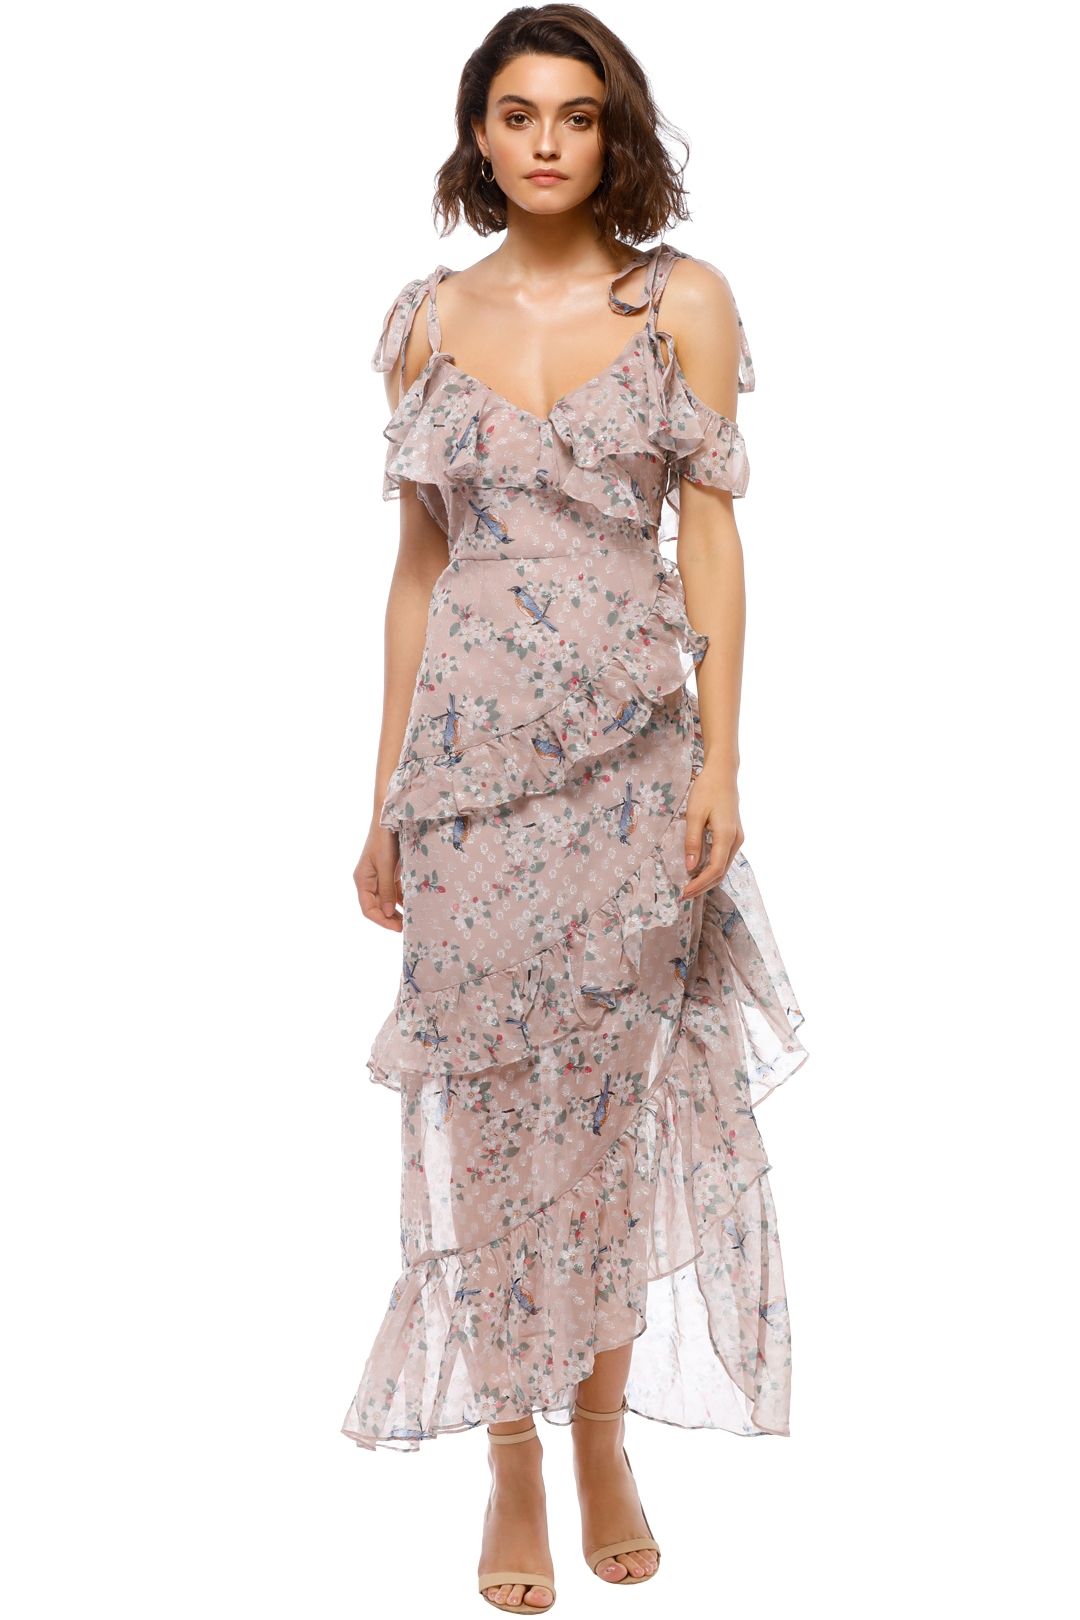 Pippa Ruffle Maxi Dress by We Are Kindred for Rent